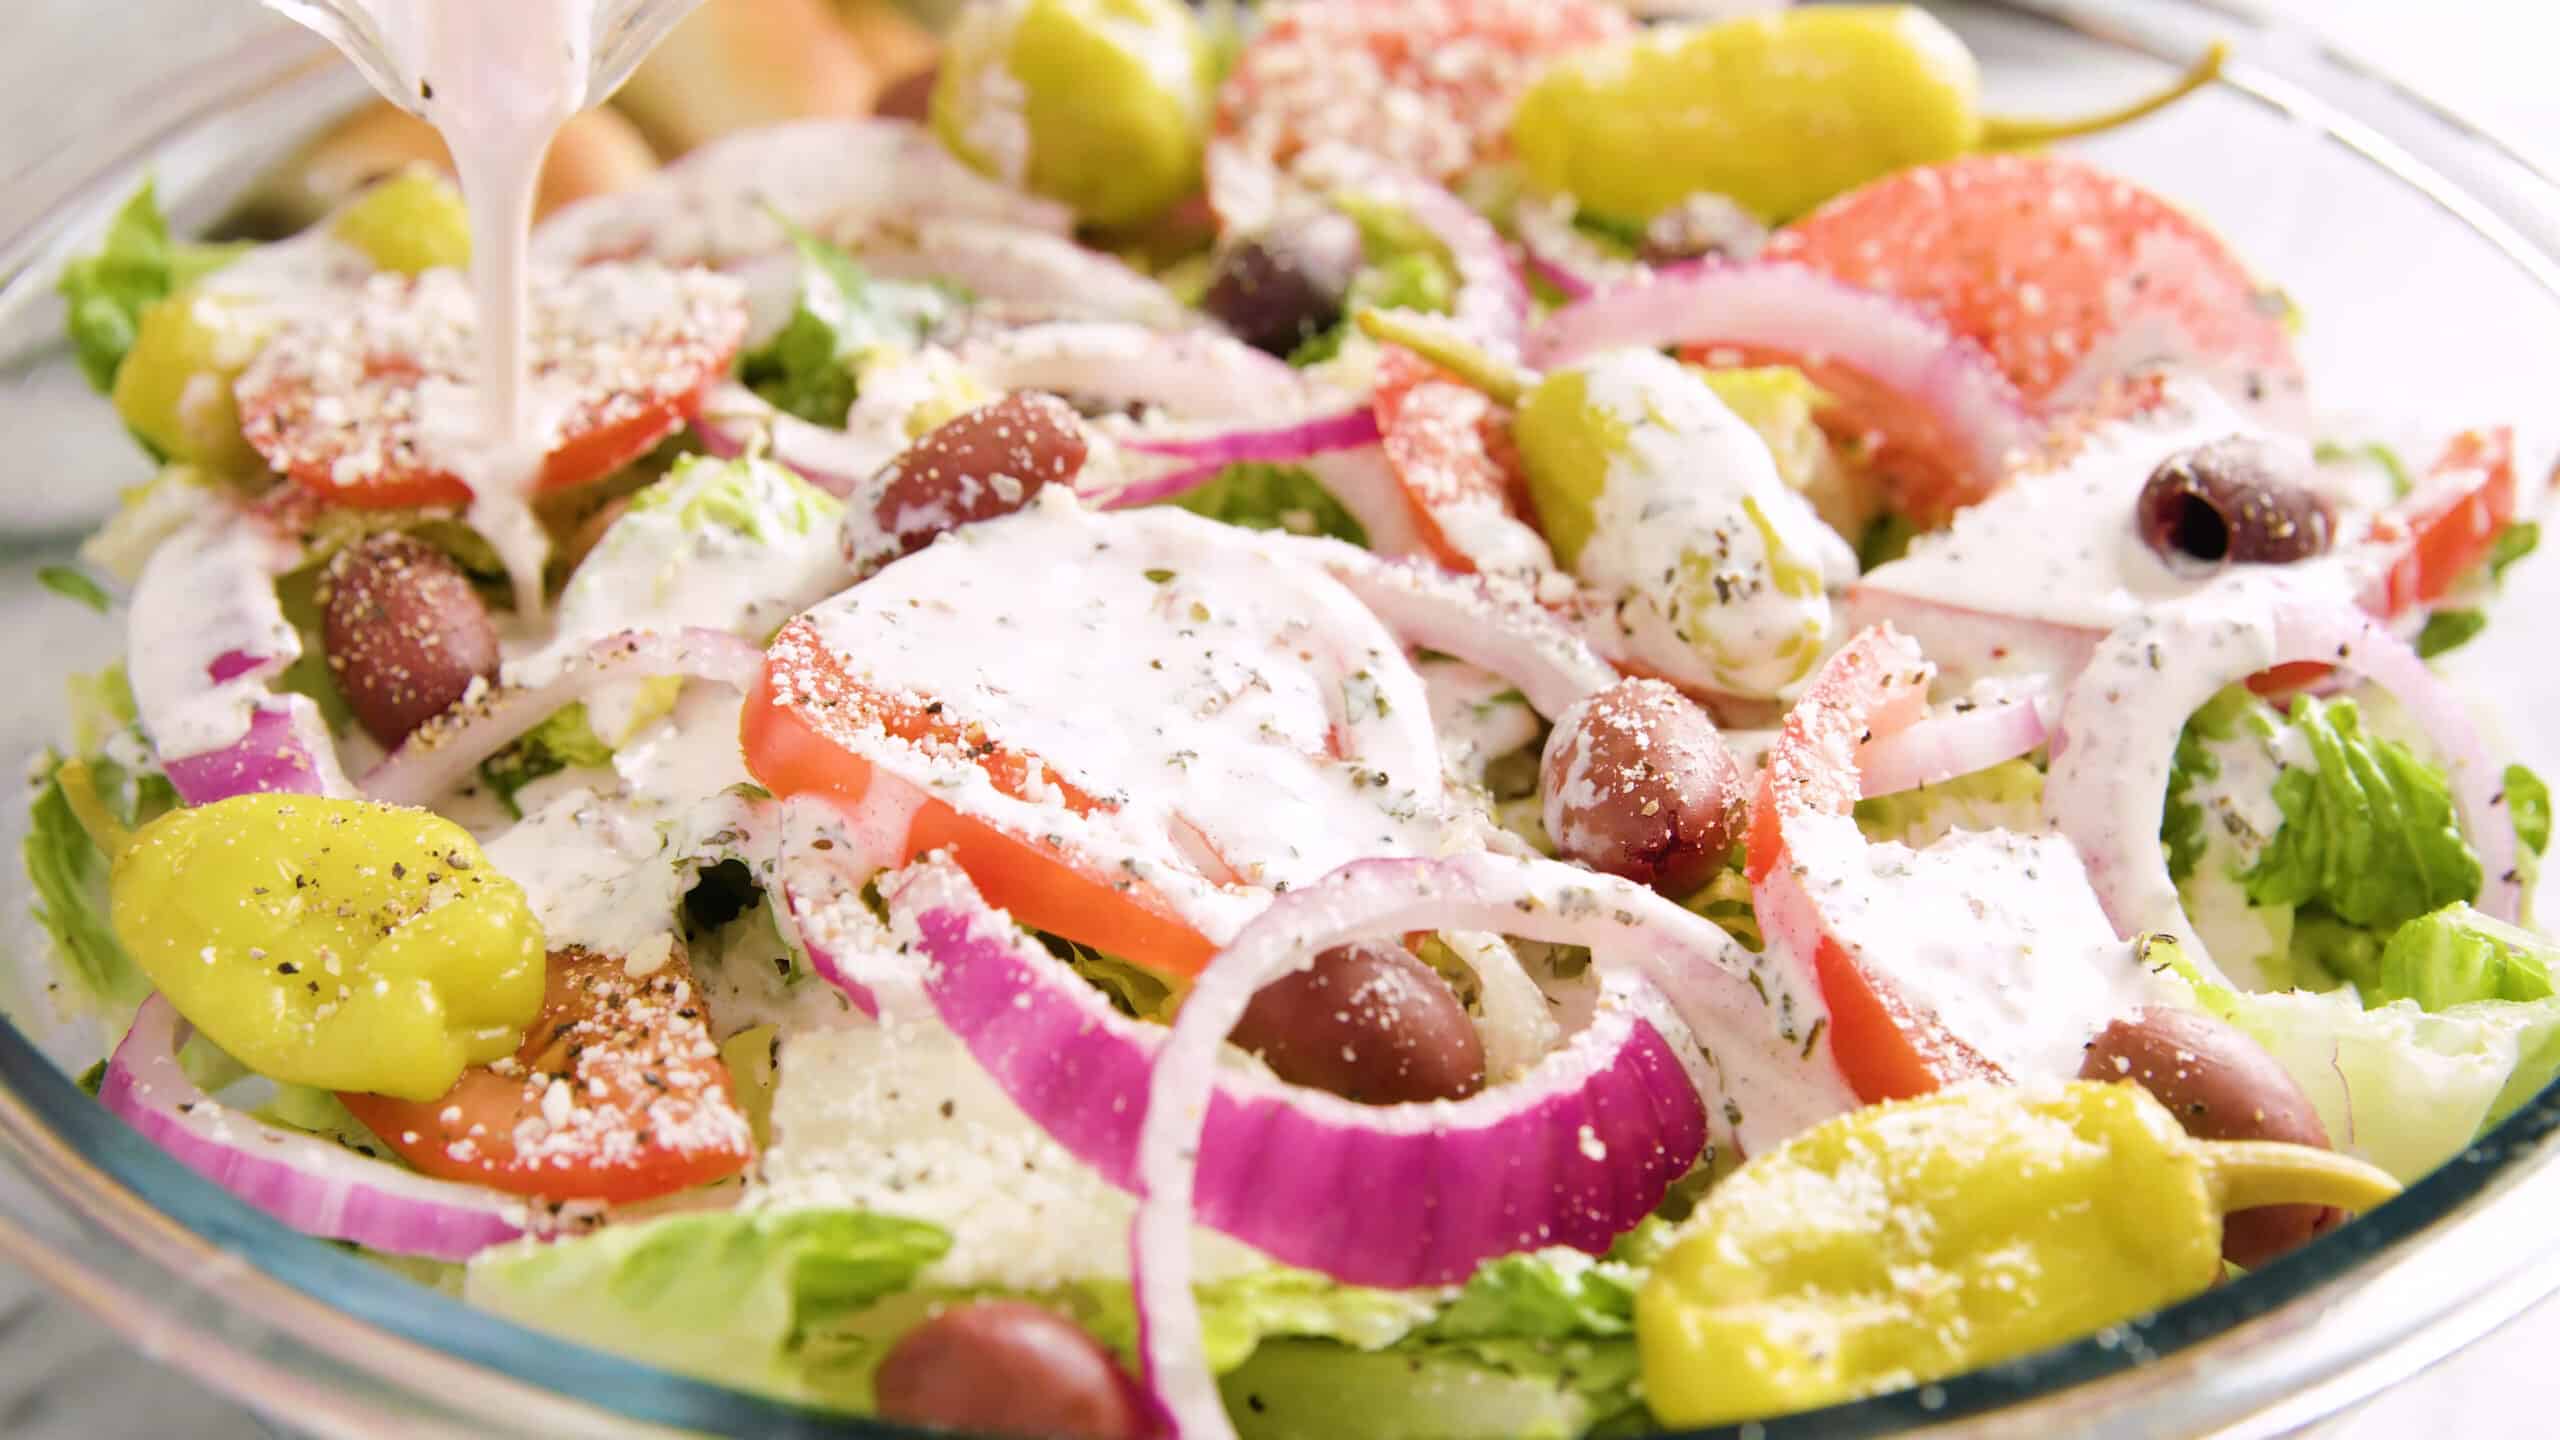 Close-up view of a large clear glass mixing bowl filled to the brim with fresh mixed salad and creamy copycat Olive Garden salad dressing being poured on top.